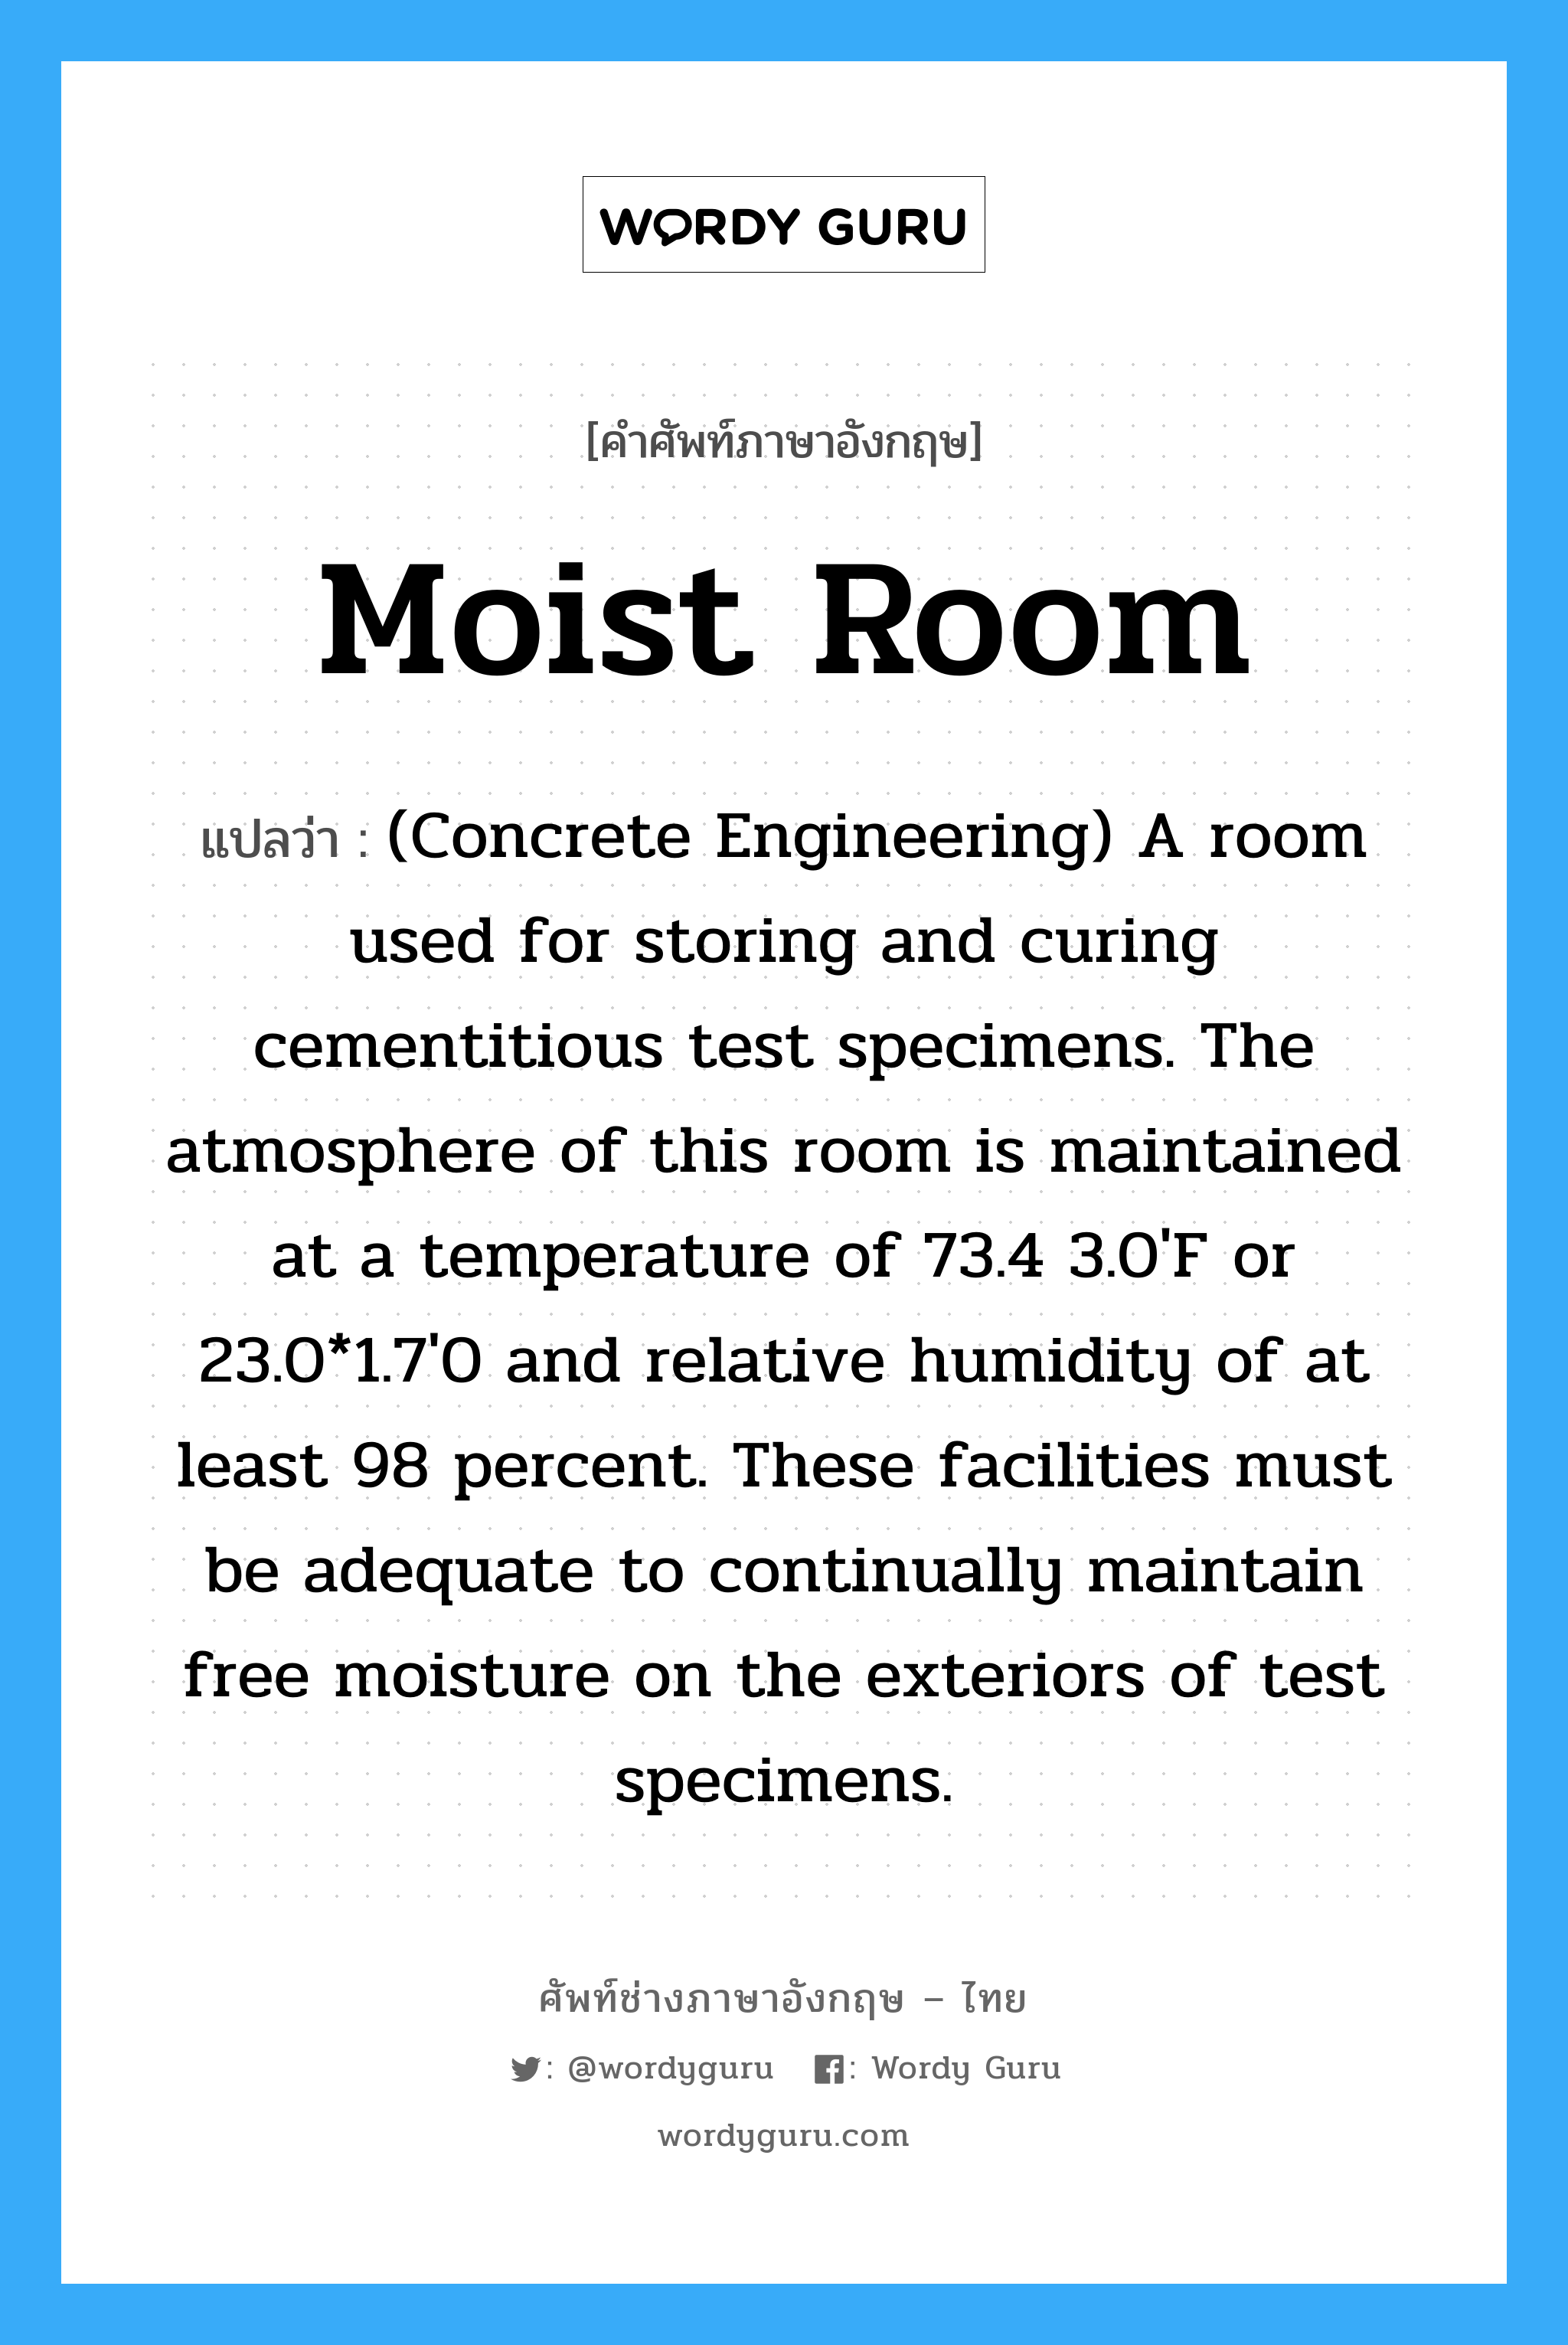 Moist Room แปลว่า?, คำศัพท์ช่างภาษาอังกฤษ - ไทย Moist Room คำศัพท์ภาษาอังกฤษ Moist Room แปลว่า (Concrete Engineering) A room used for storing and curing cementitious test specimens. The atmosphere of this room is maintained at a temperature of 73.4 3.0'F or 23.0*1.7'0 and relative humidity of at least 98 percent. These facilities must be adequate to continually maintain free moisture on the exteriors of test specimens.